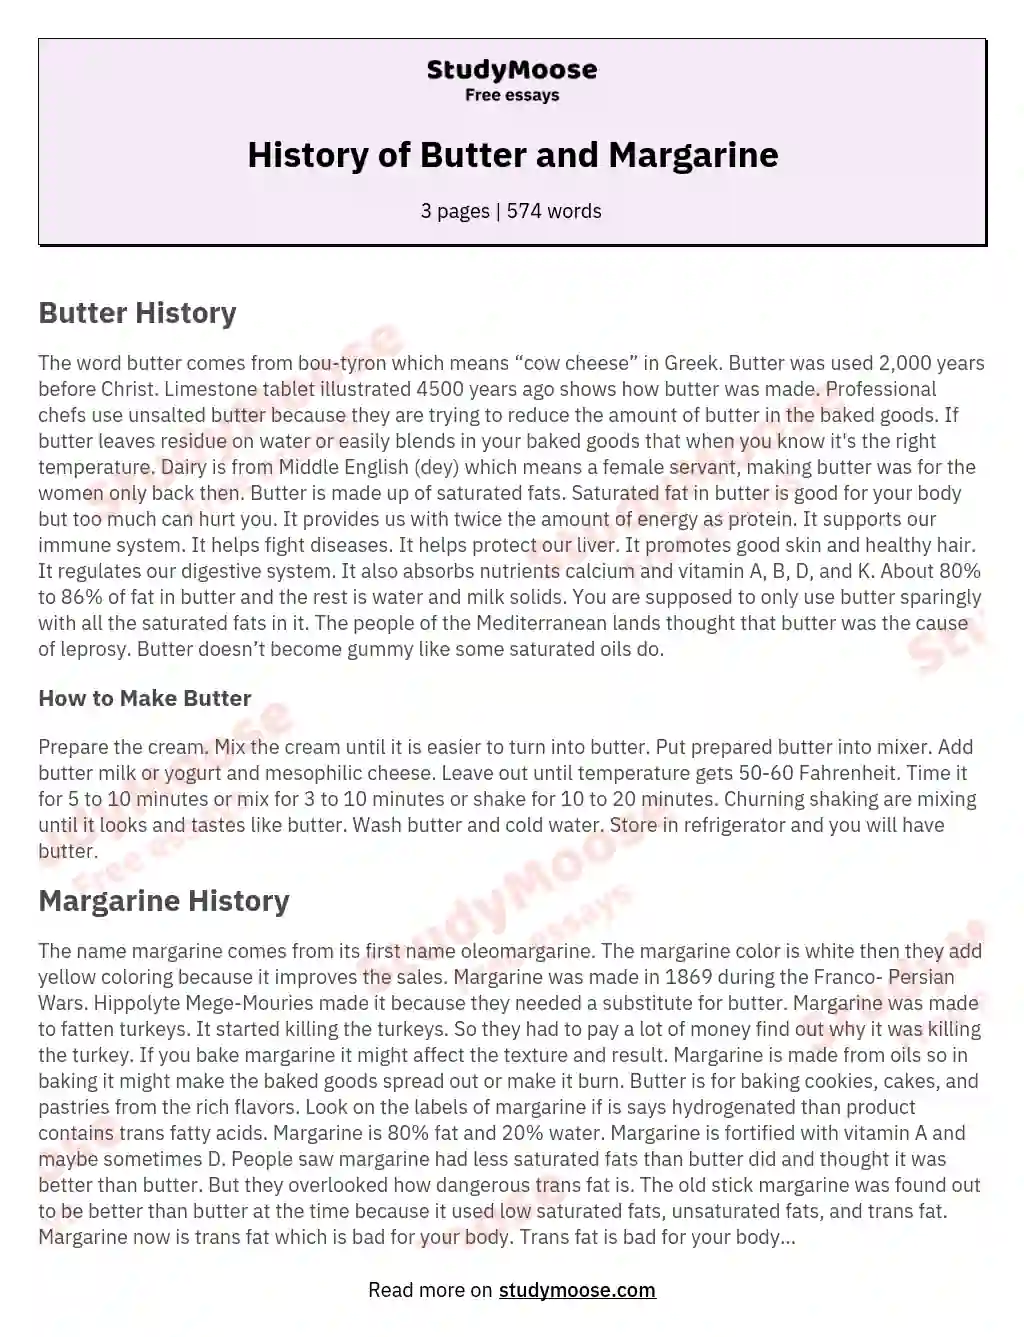 History of Butter and Margarine essay